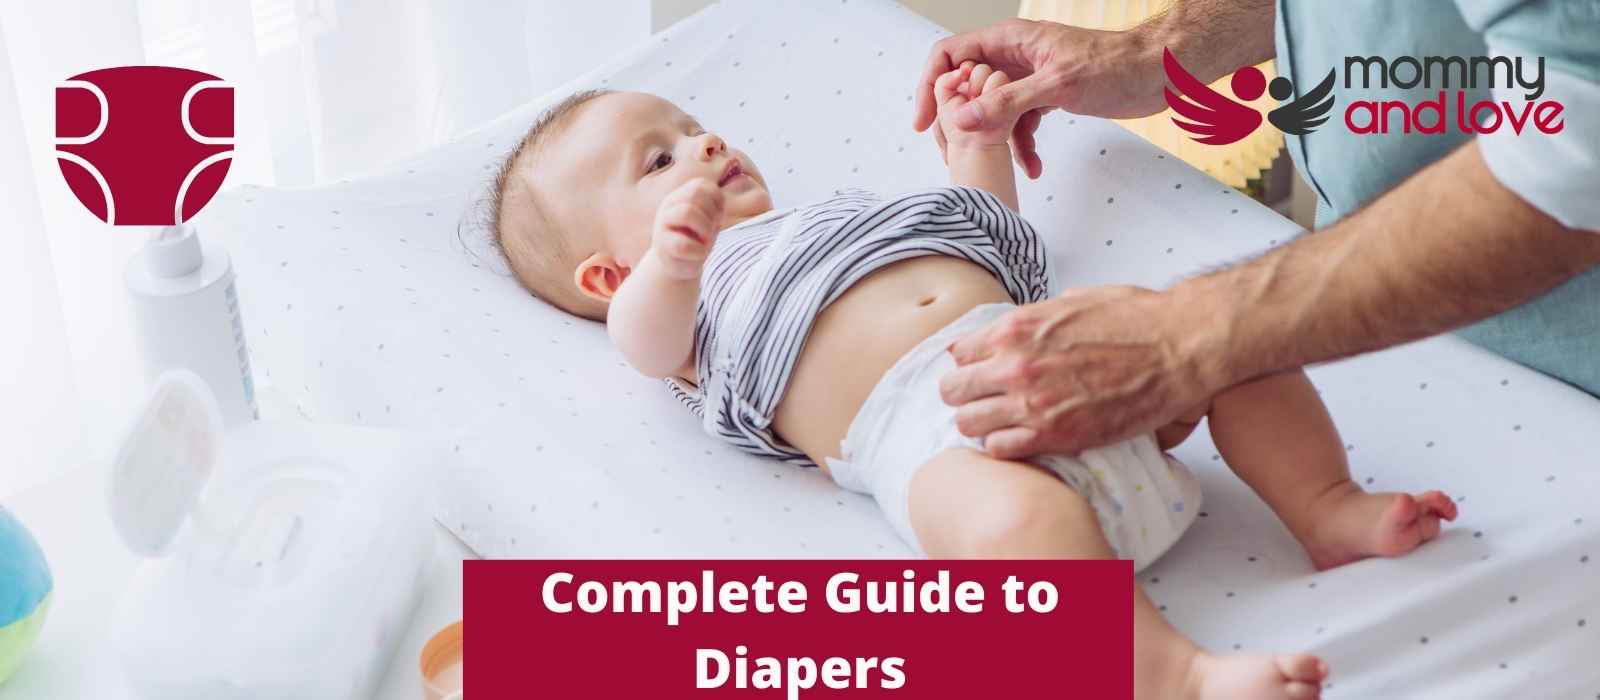 Complete Guide to Diapering